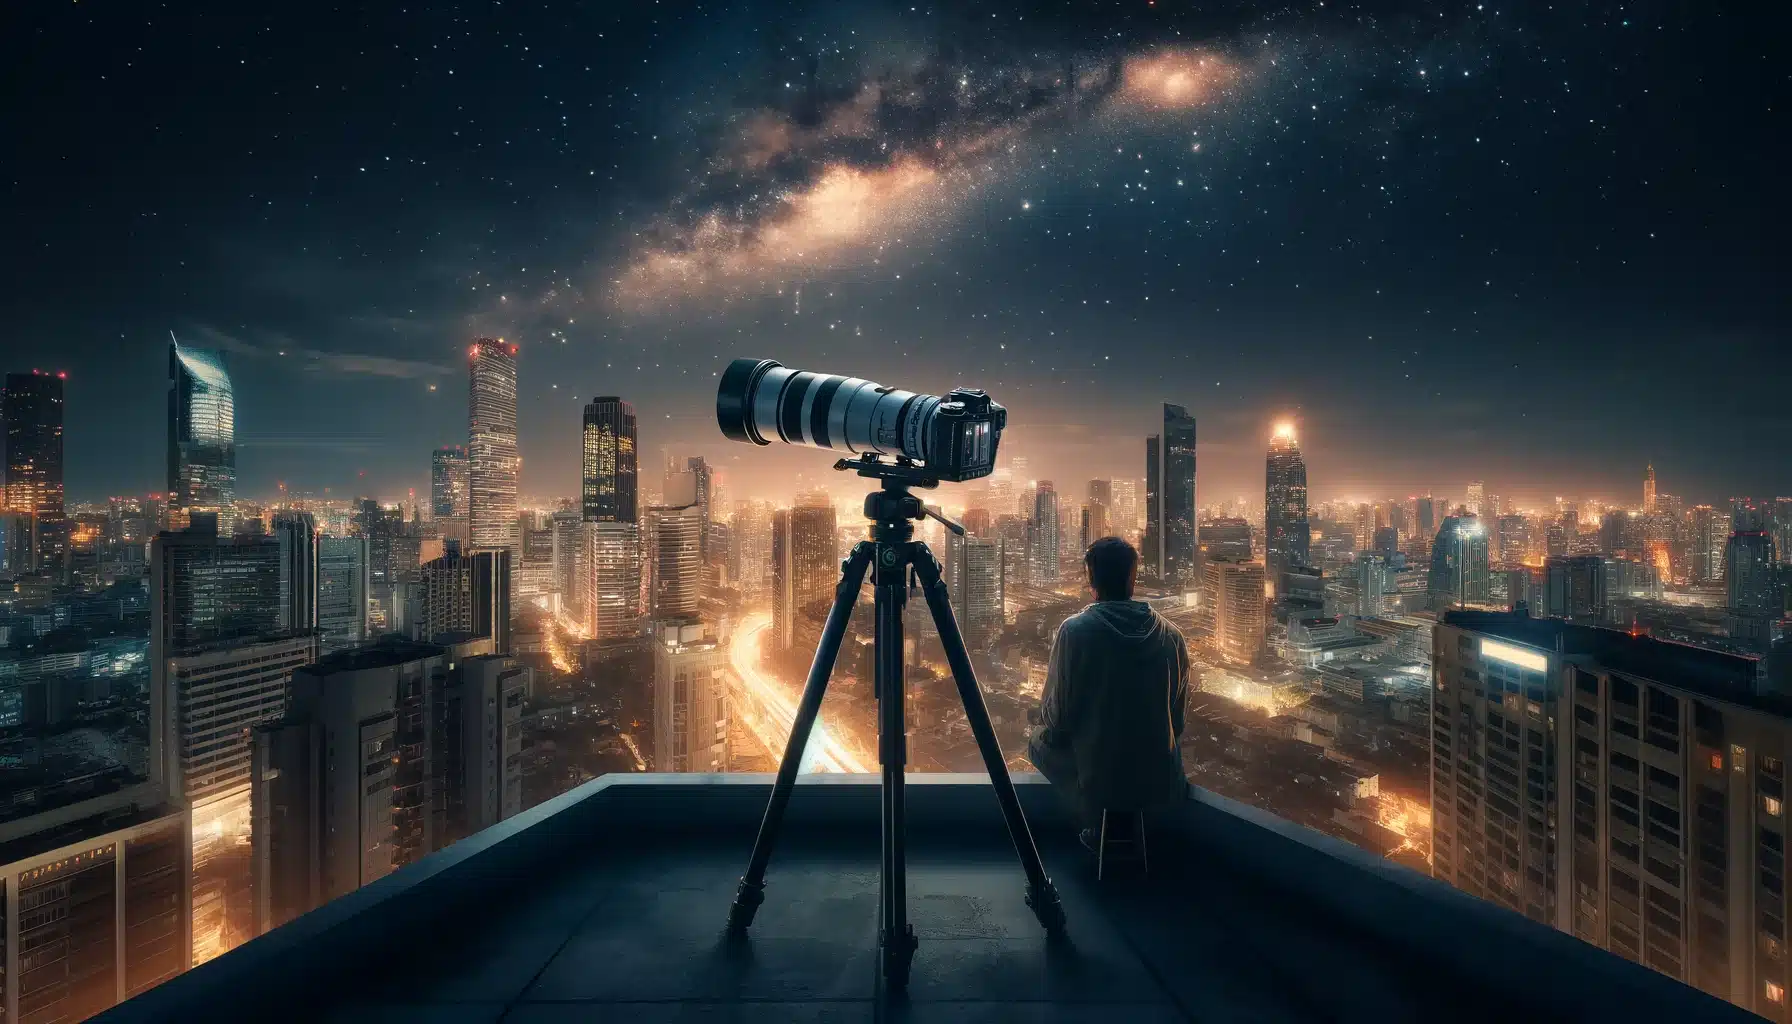 Photographer on a city rooftop at night using a tripod to capture stars above an illuminated urban skyline, showcasing Cosmology in a city.